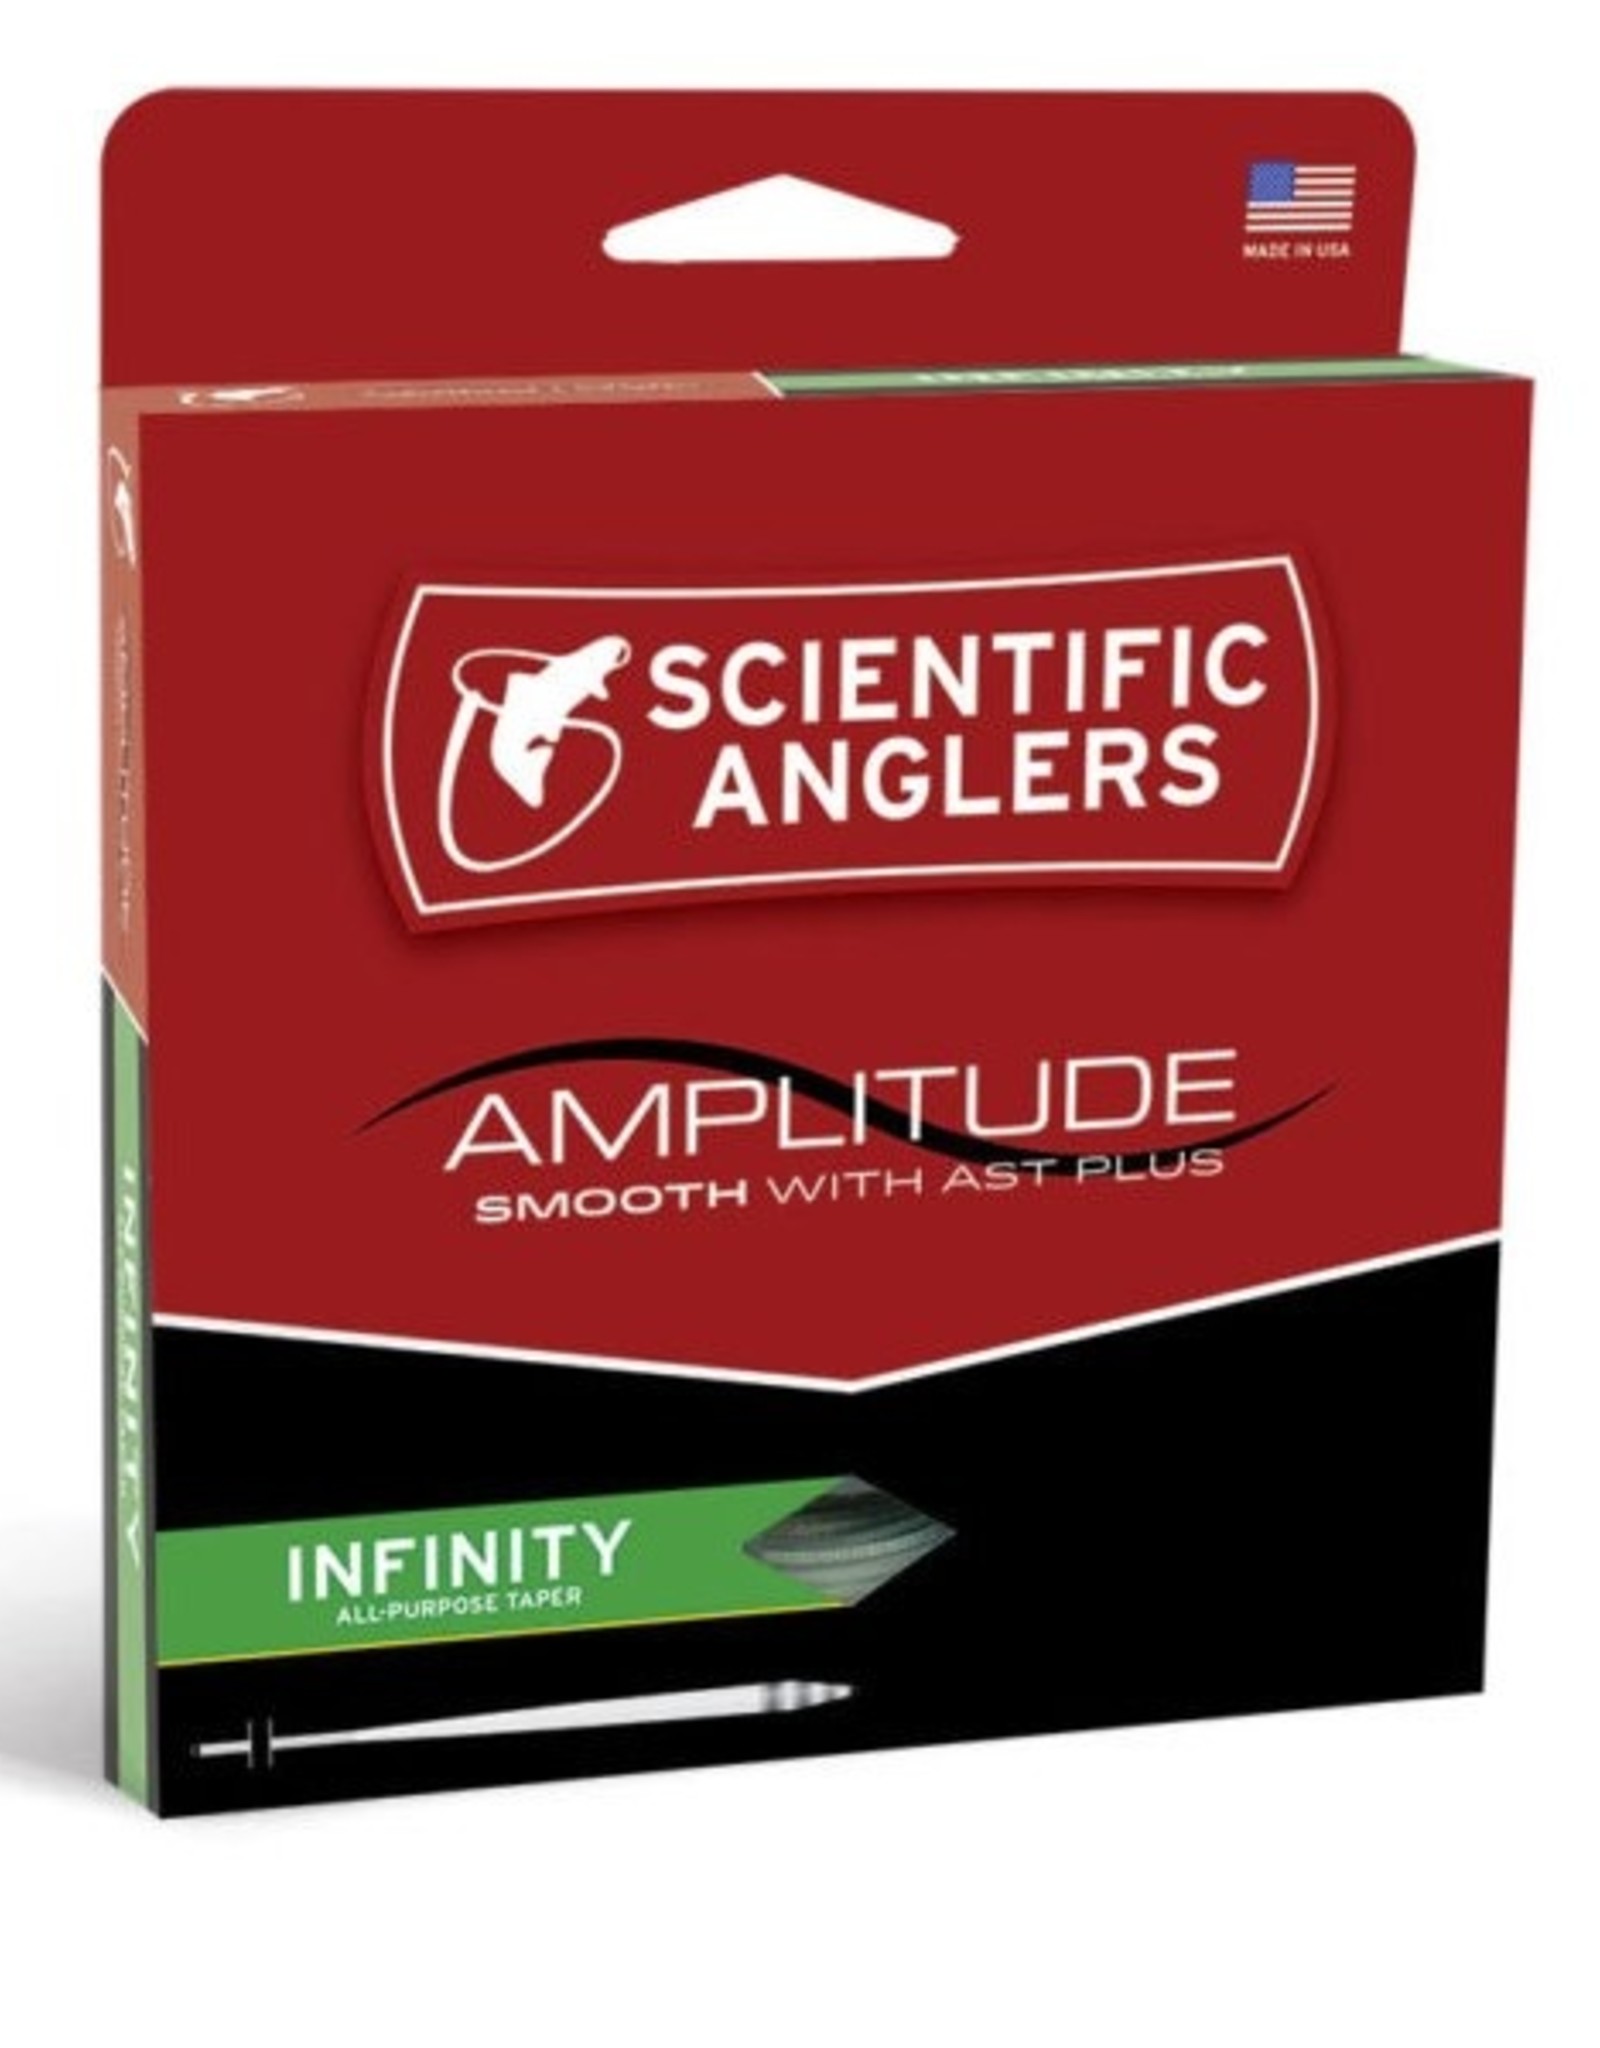 SCIENTIFIC ANGLERS AMPLITUDE SMOOTH INFINITY